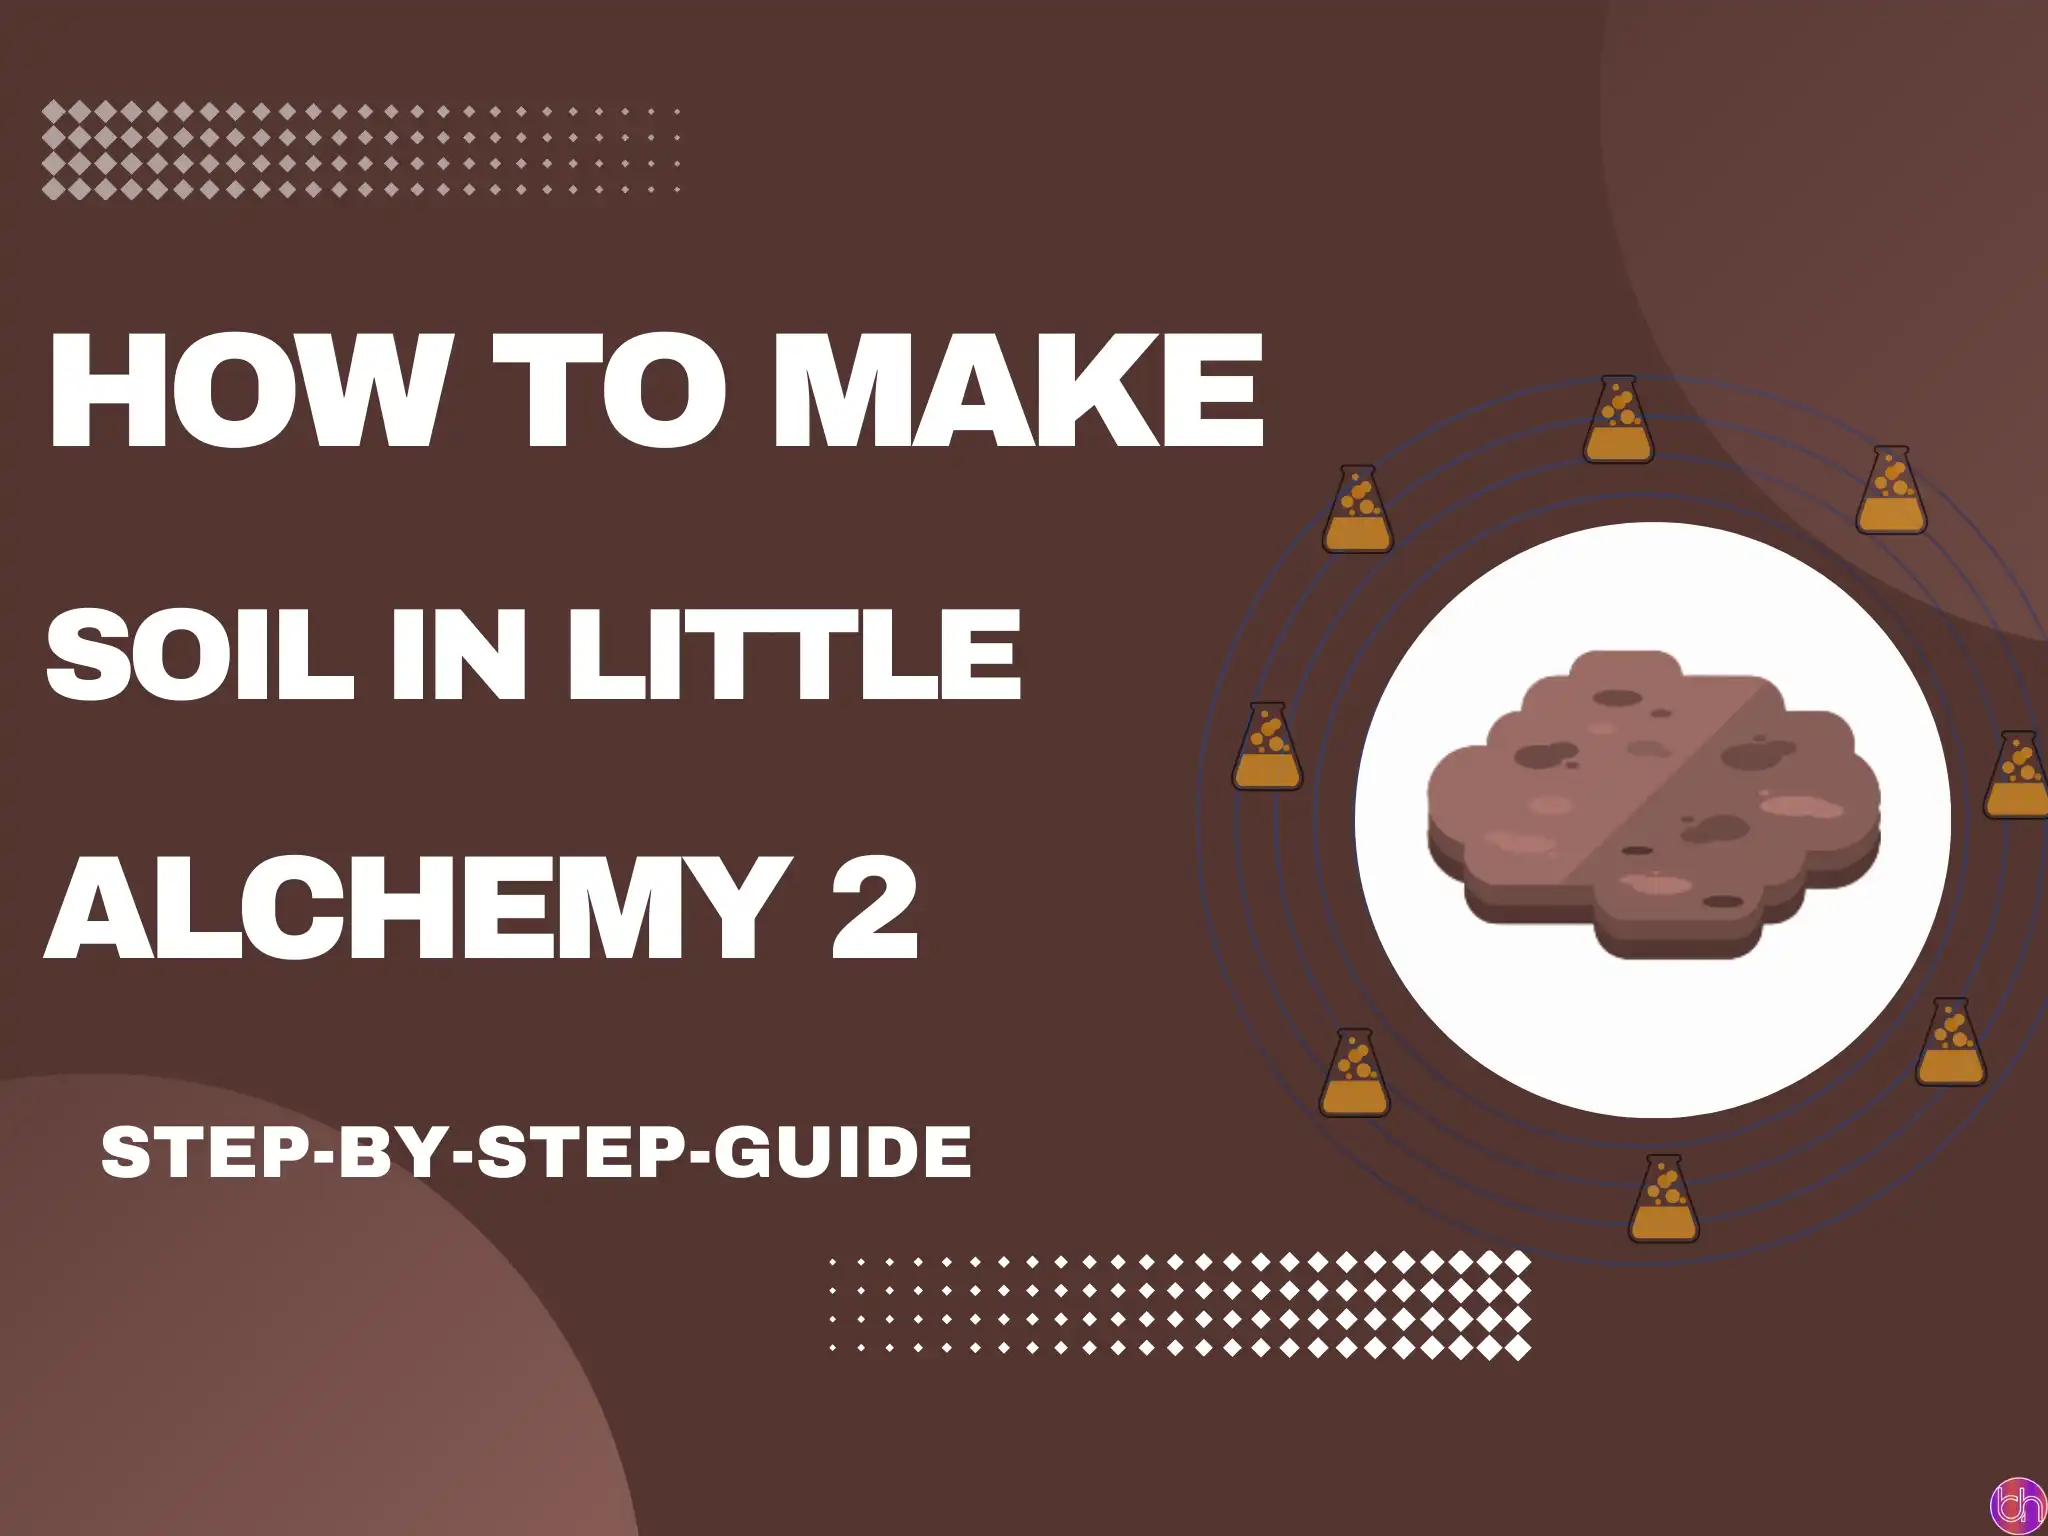 How to make Soil in Little Alchemy 2